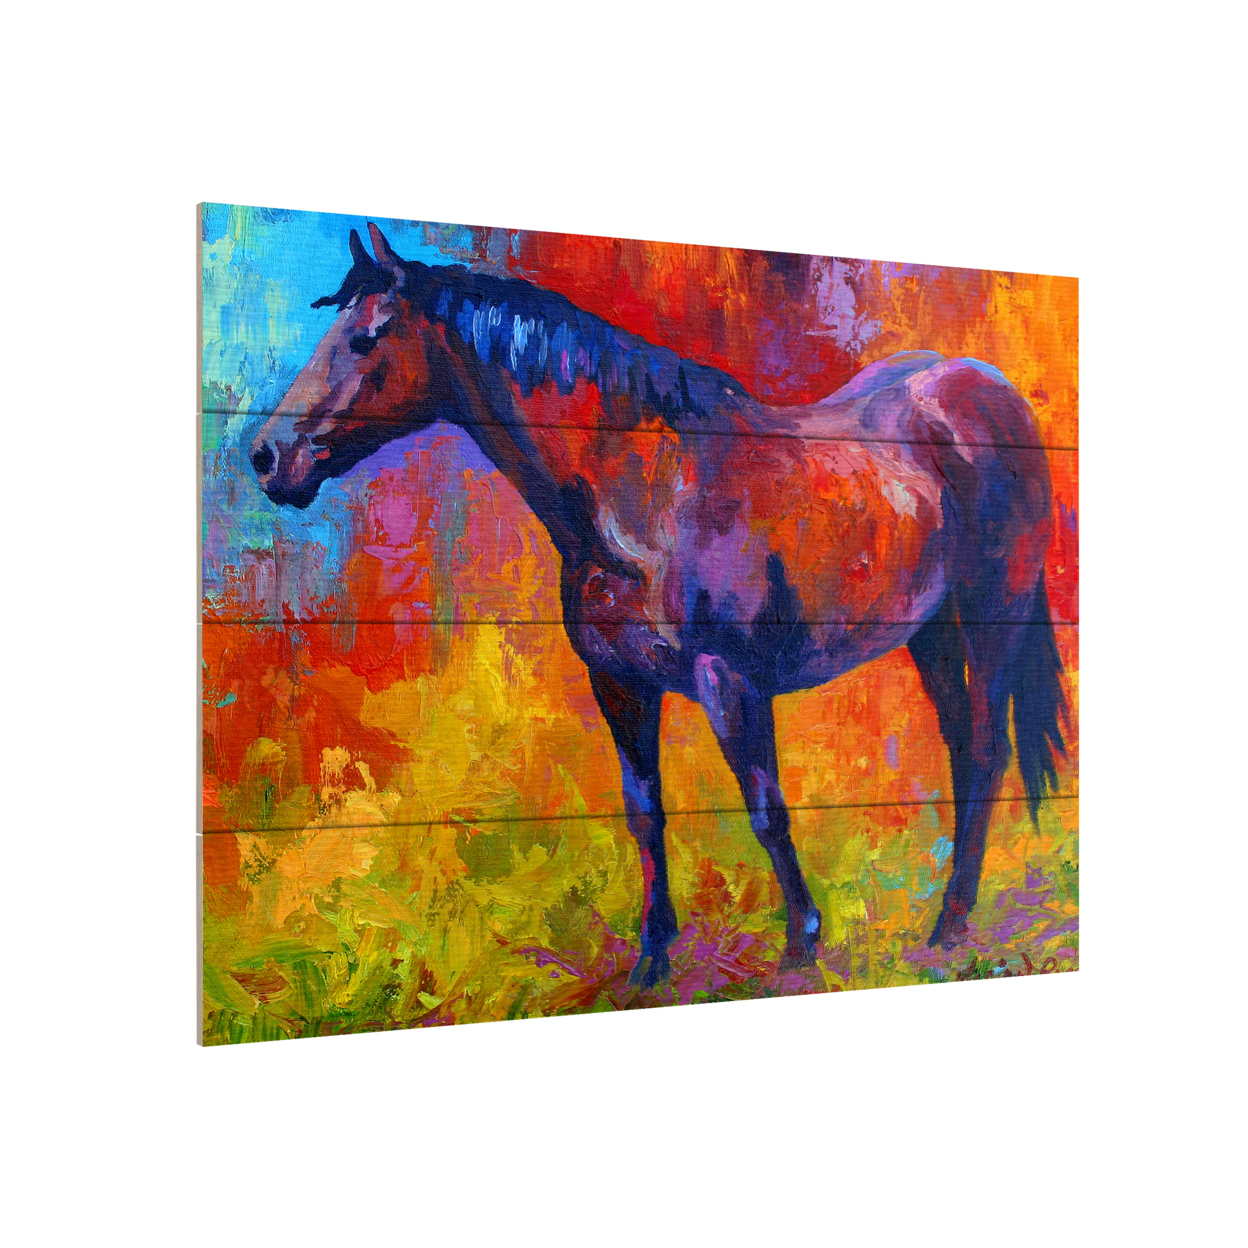 Wall Art 12 X 16 Inches Titled Bay Mare I Ready To Hang Printed On Wooden Planks